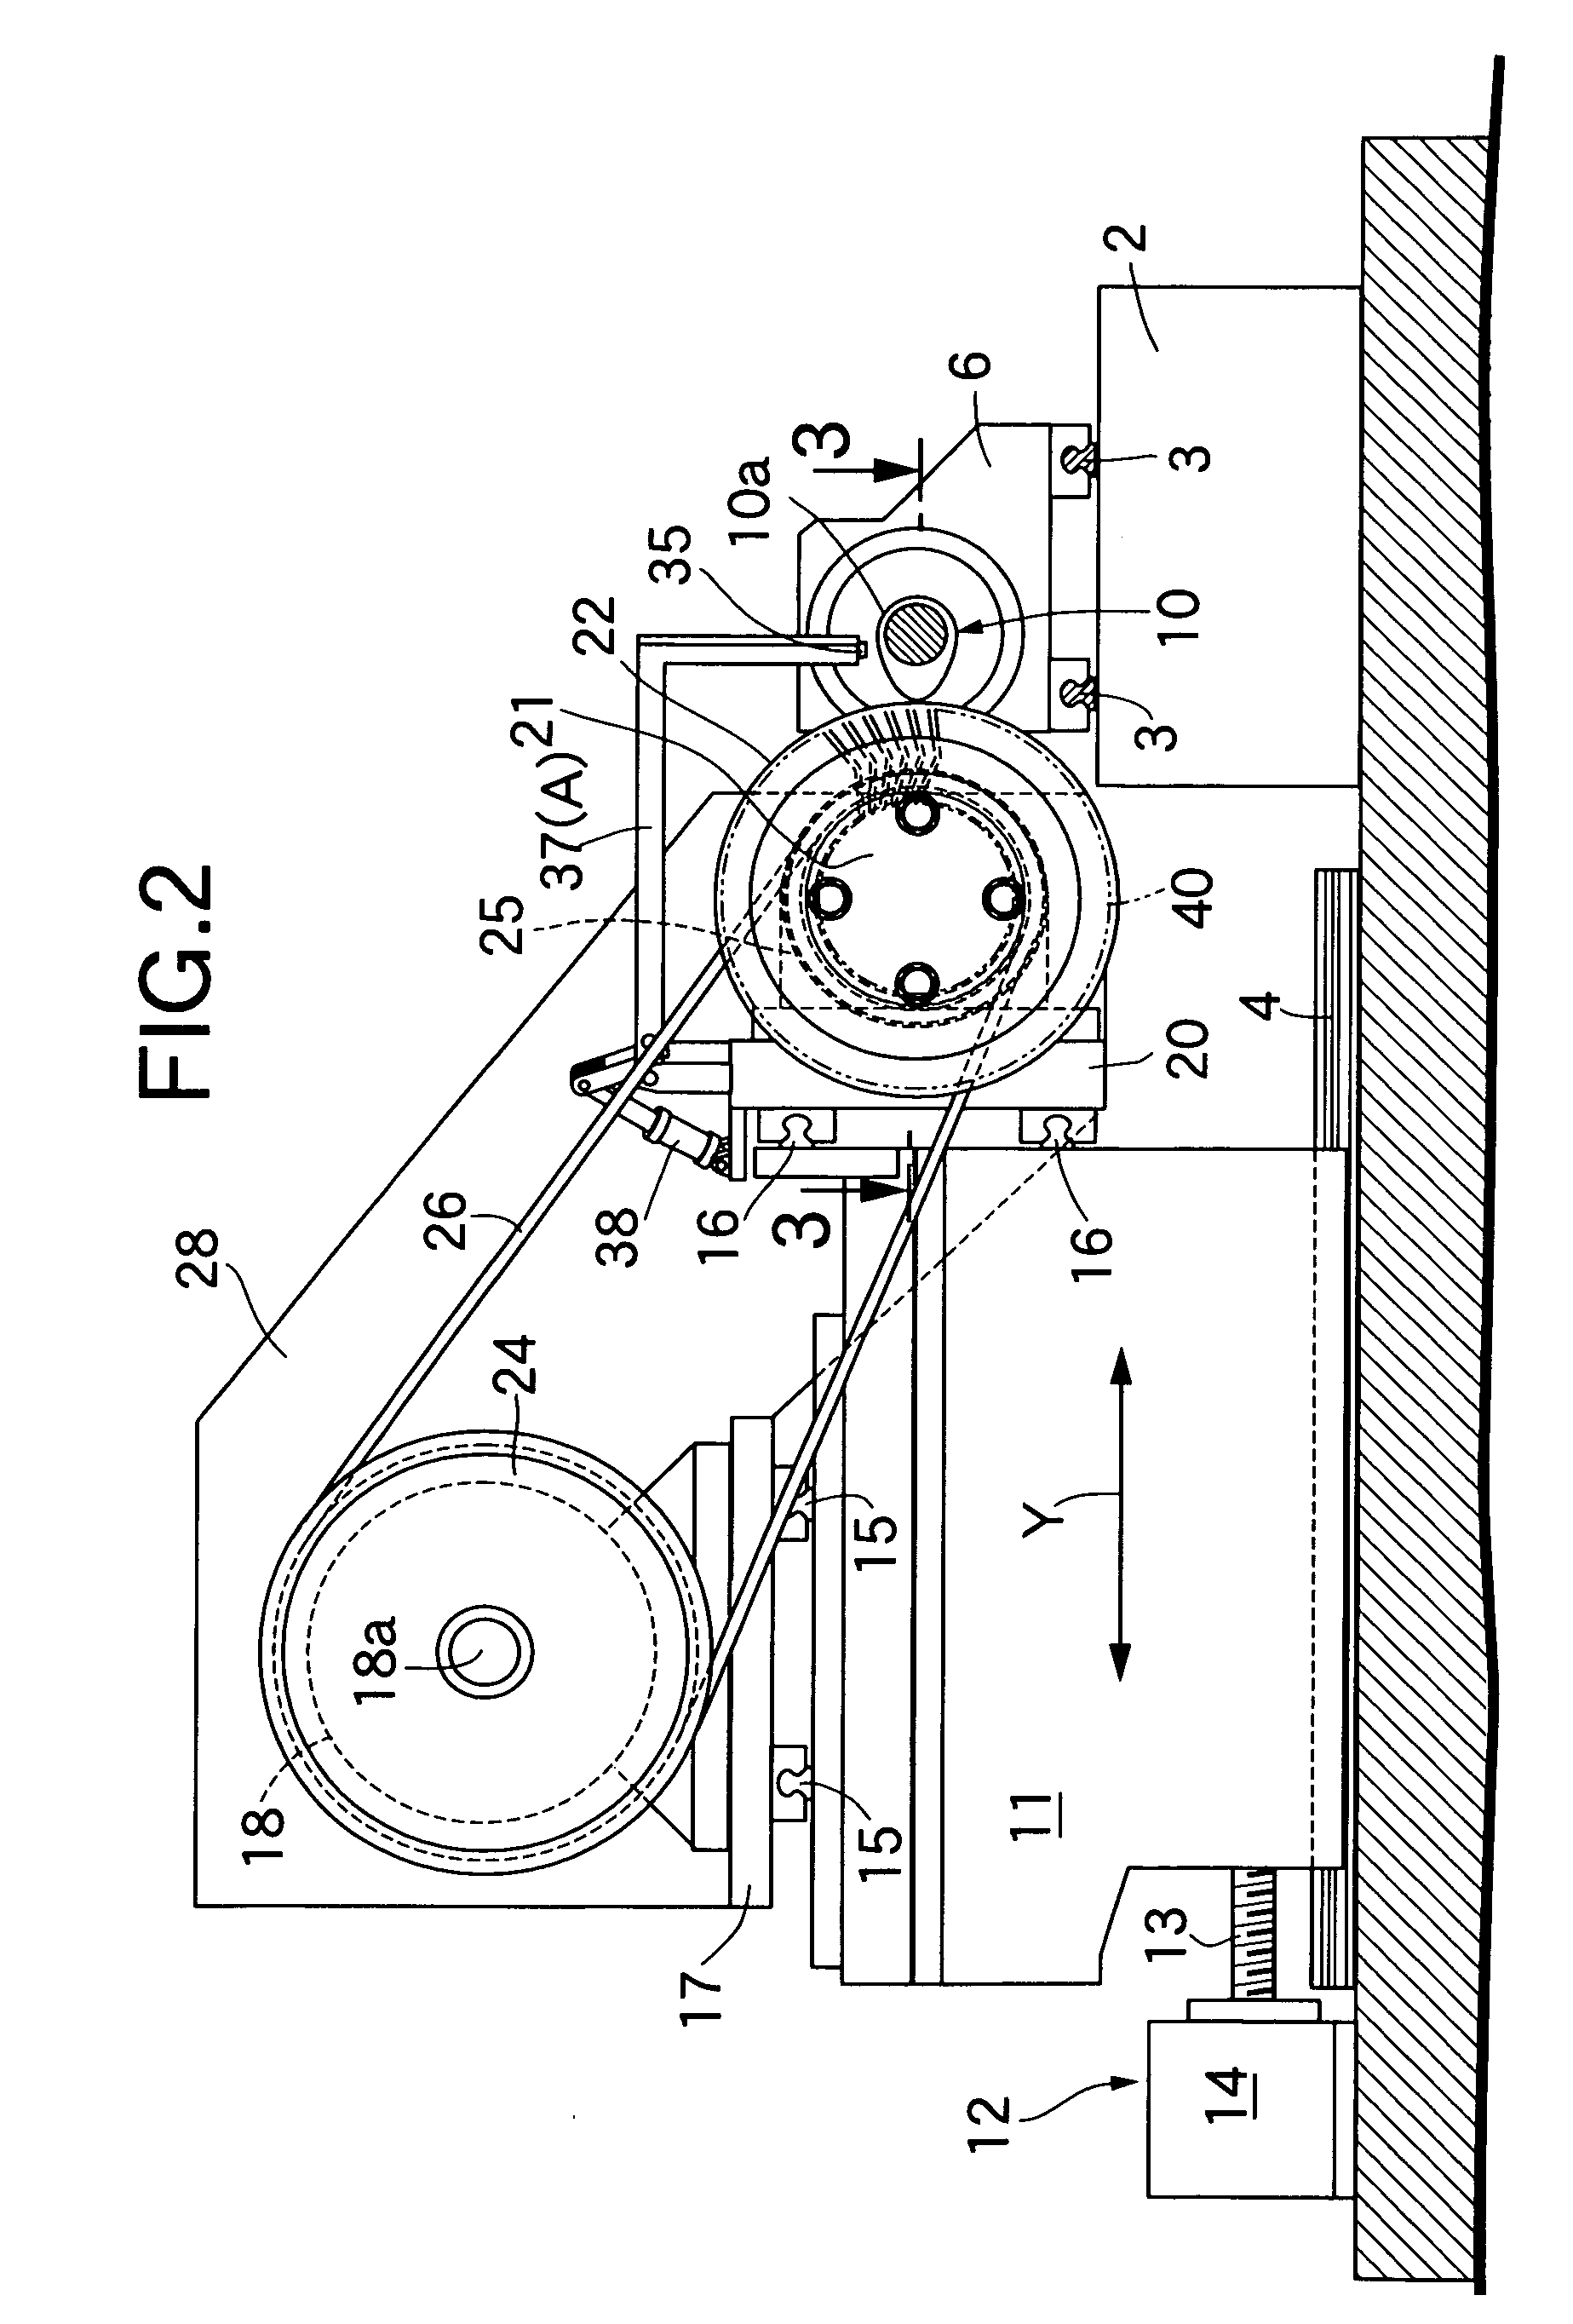 Process and apparatus for grinding work for non-circular rotor, as well as camshaft